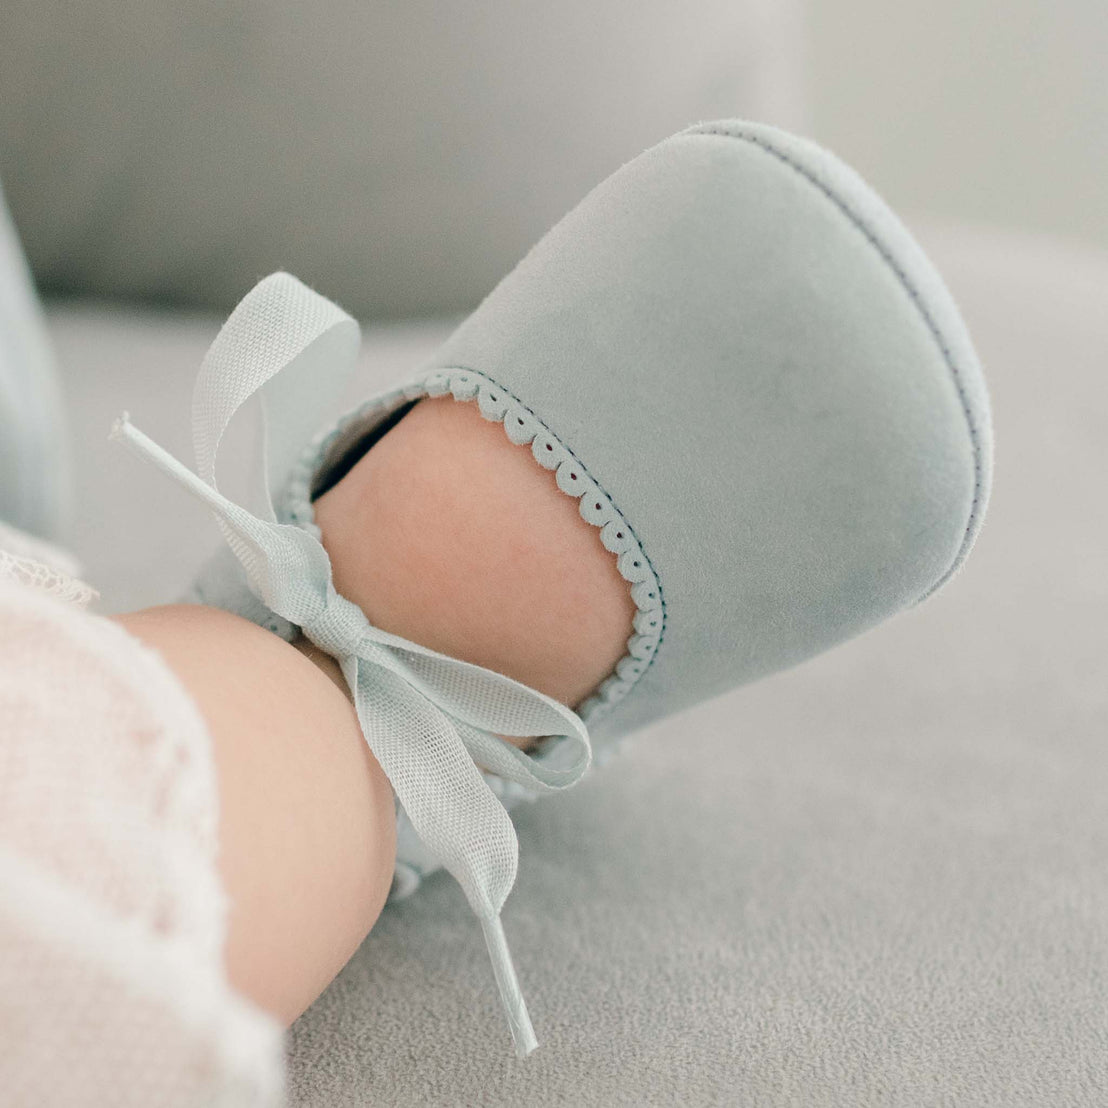 Baby girl wearing the sky blue Emily Suede Tie Mary Janes. Shoes are made with a soft suede with tie detail closure.